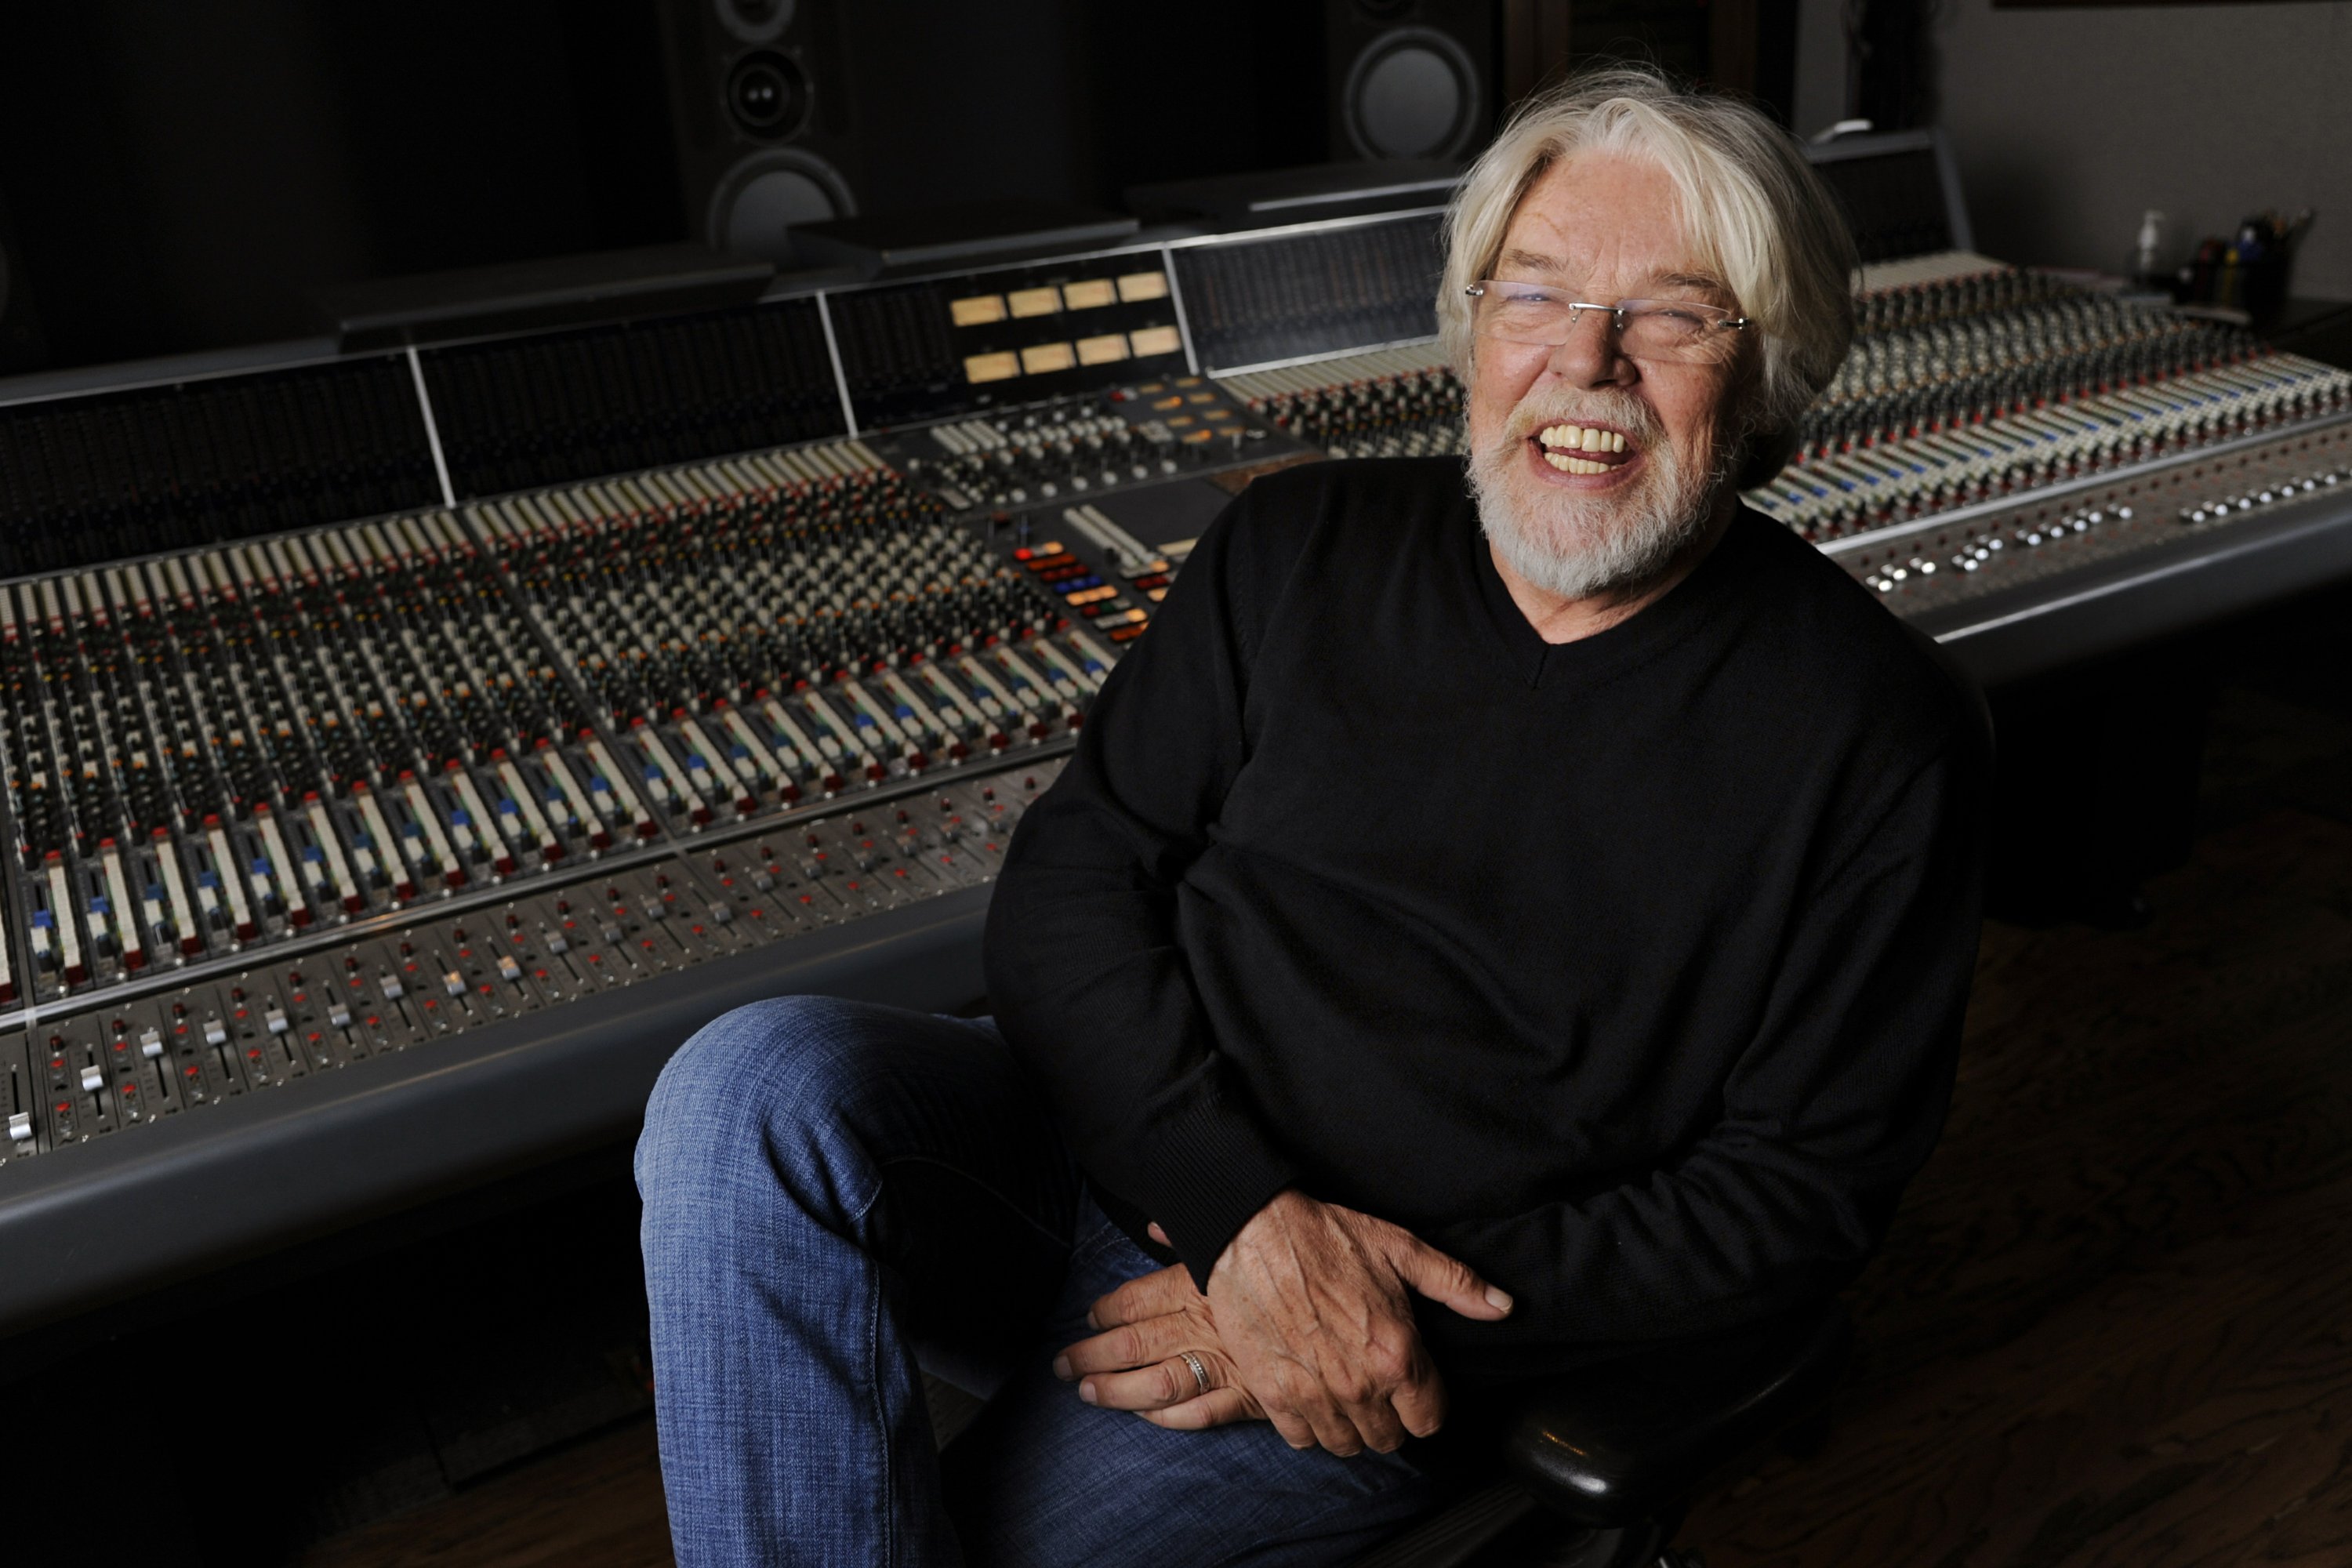 New dates being added for Bob Seger's final concert tour AP News